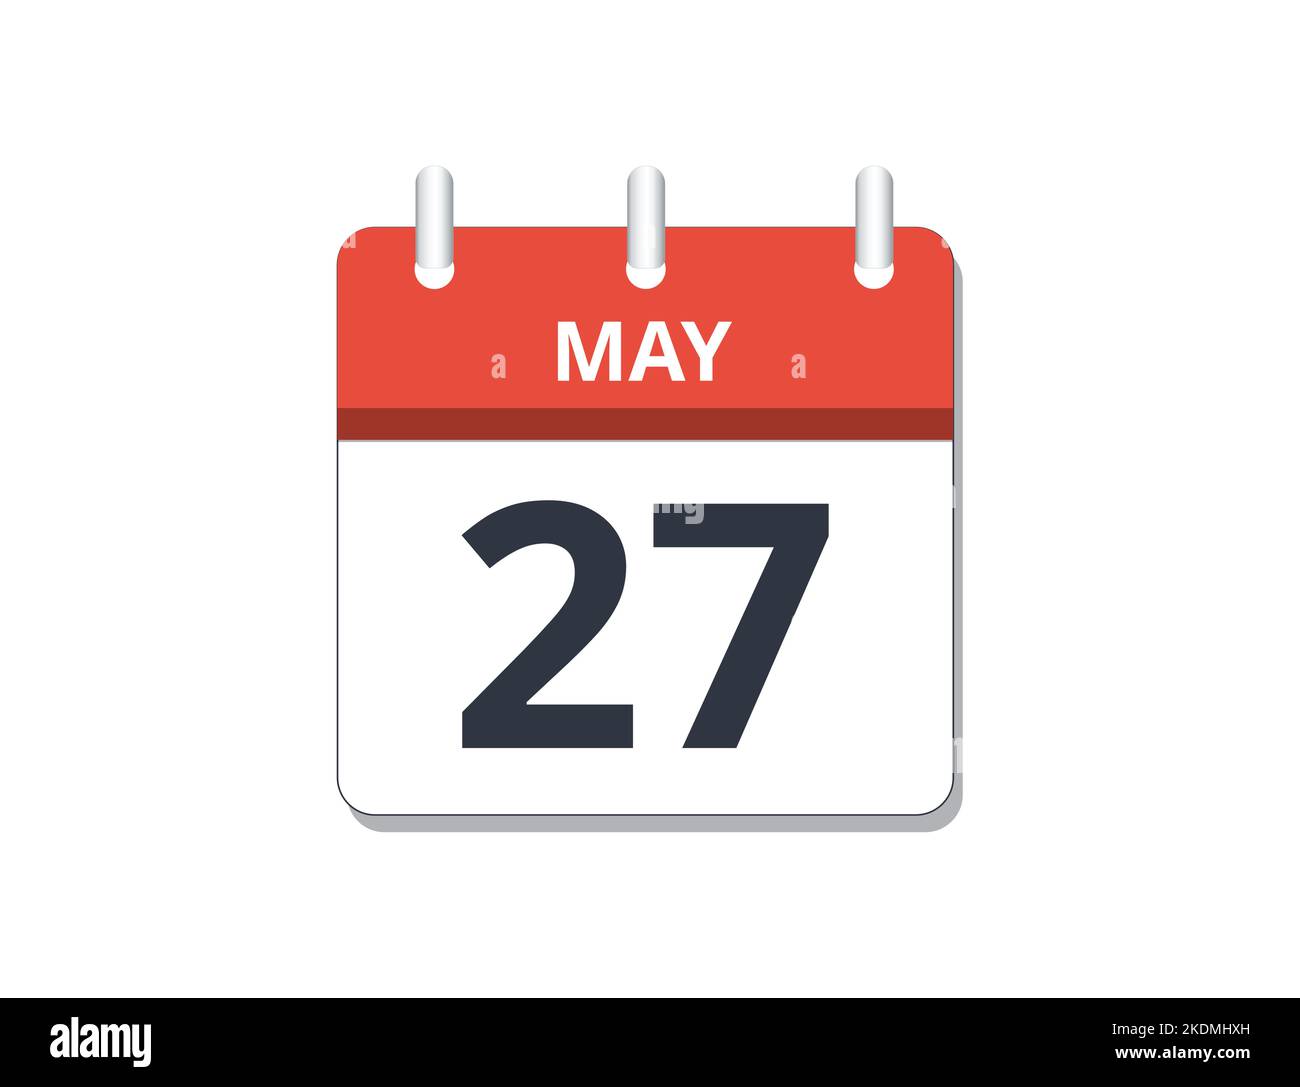 May 27th calendar icon vector. Concept of schedule, business and tasks Stock Vector